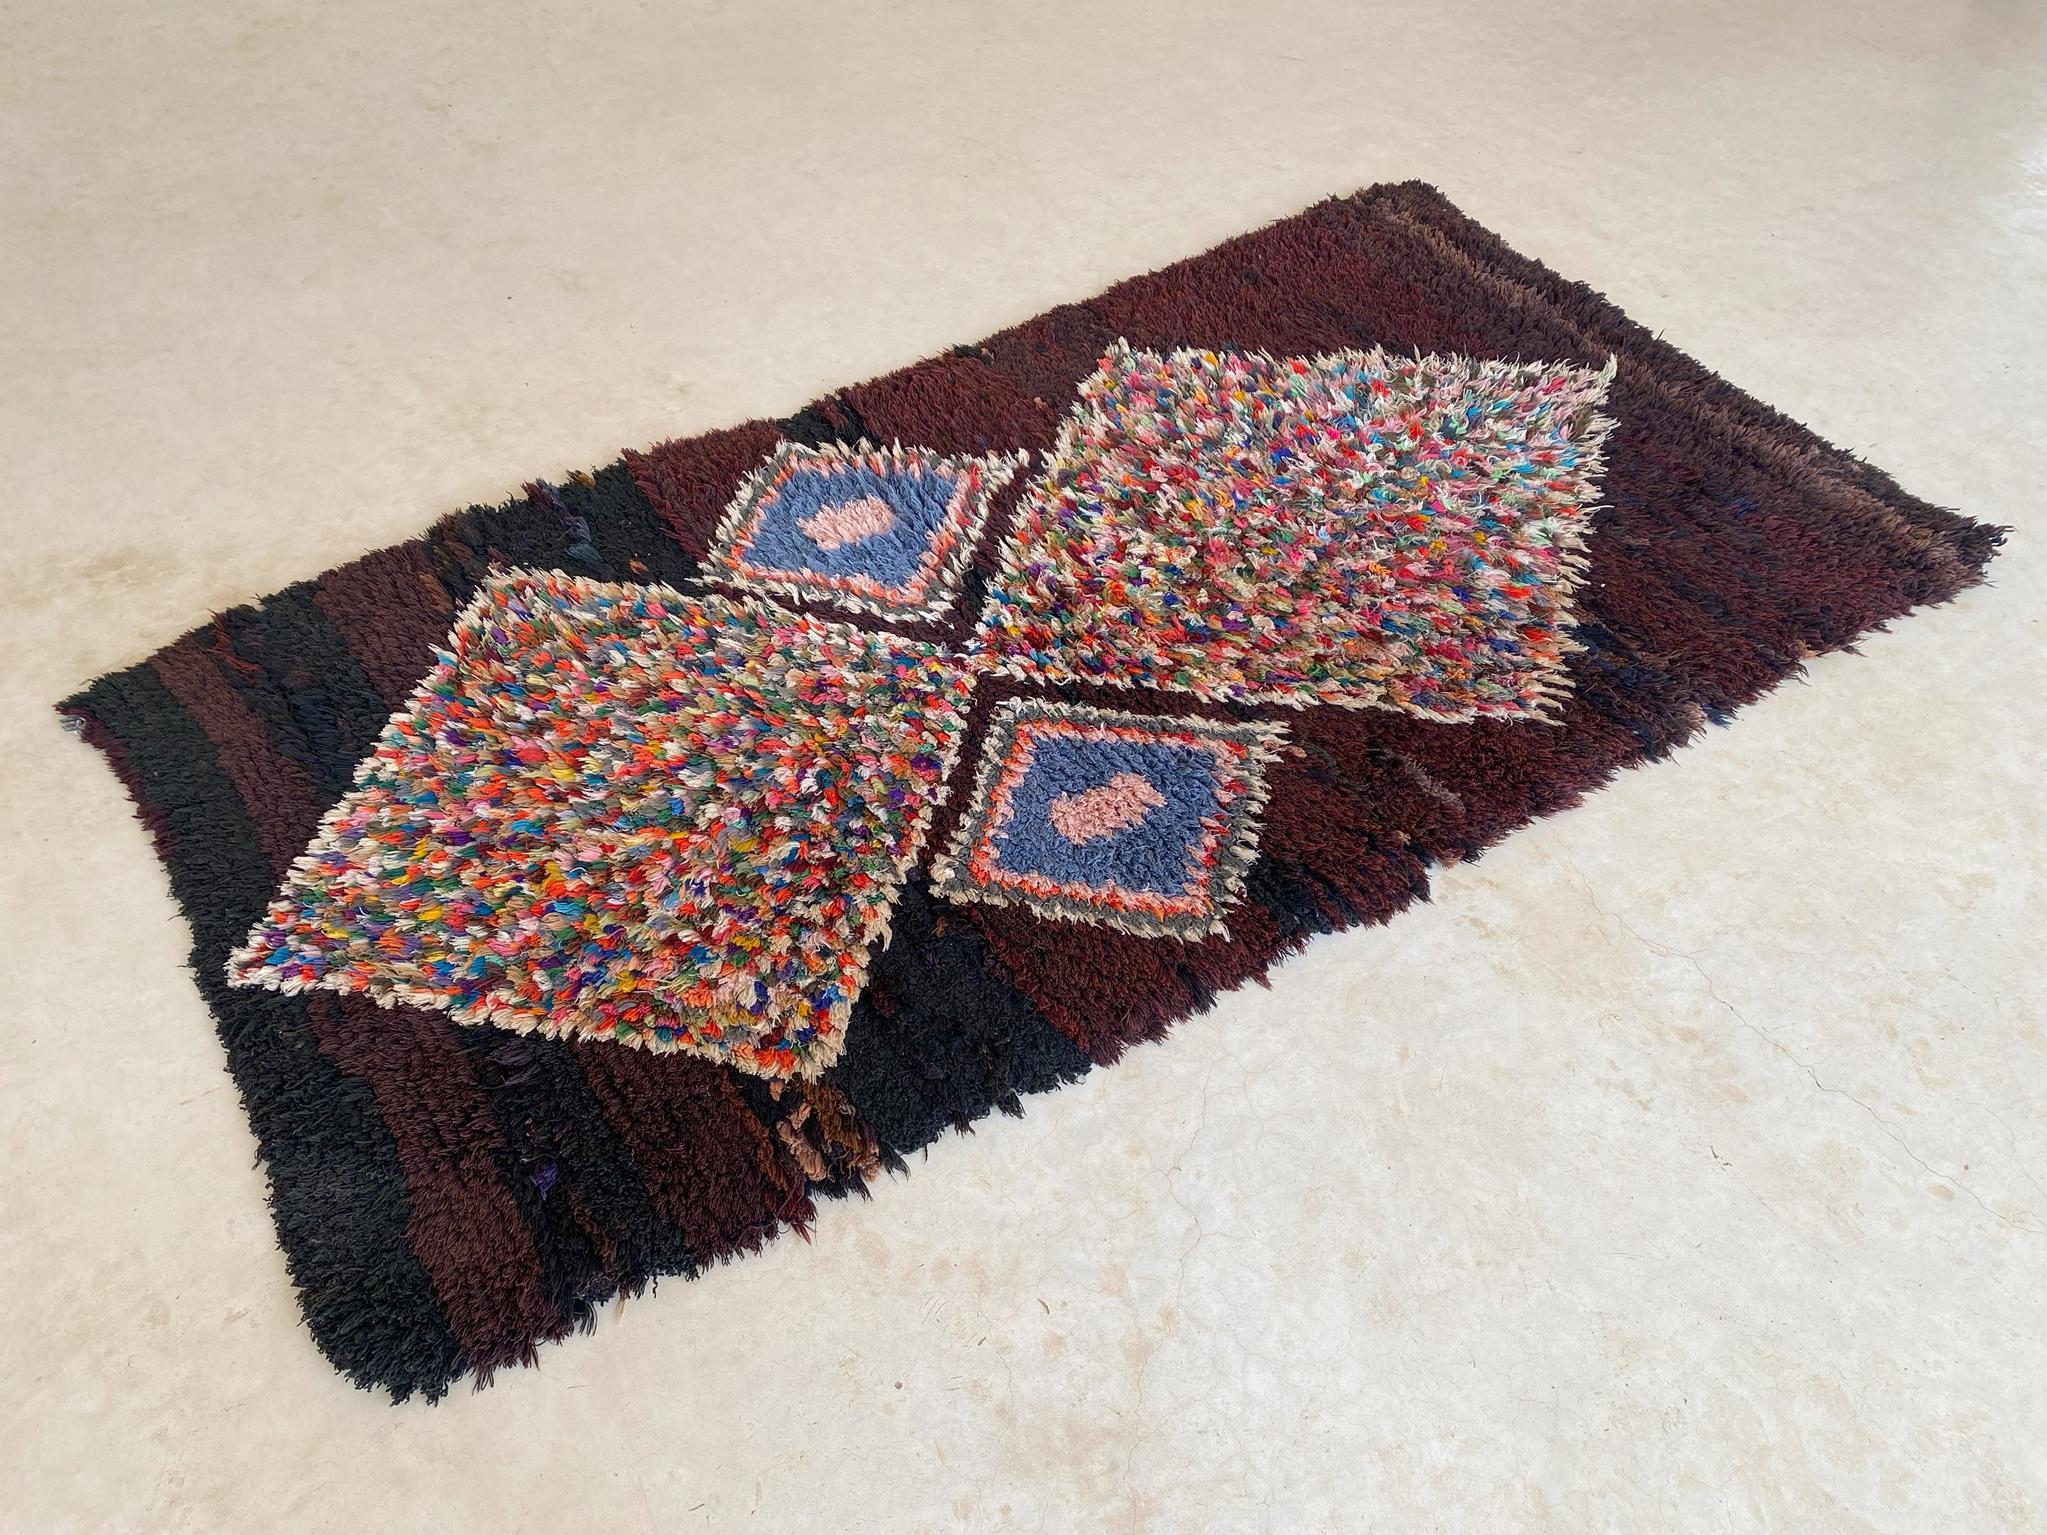 Vintage Moroccan Boucherouite rug - Brown/multicolor - 3.1x5.9feet / 96x180cm In Good Condition For Sale In Marrakech, MA